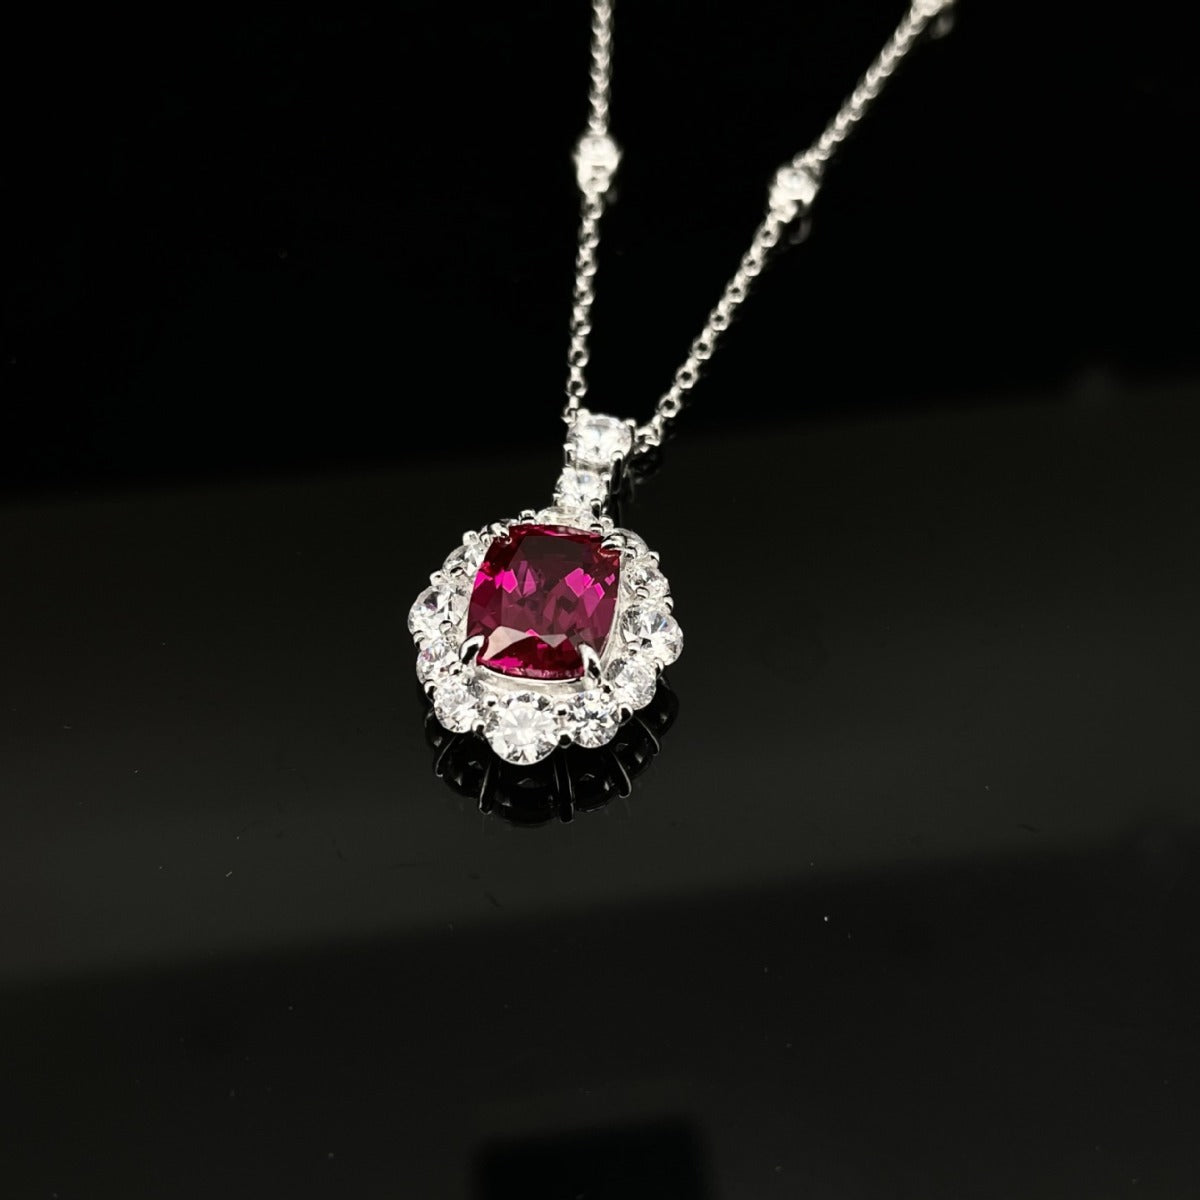 Advanced retro style collarbone chain Oval Cut Ruby Pendant Necklace for Women wiht Gift Box